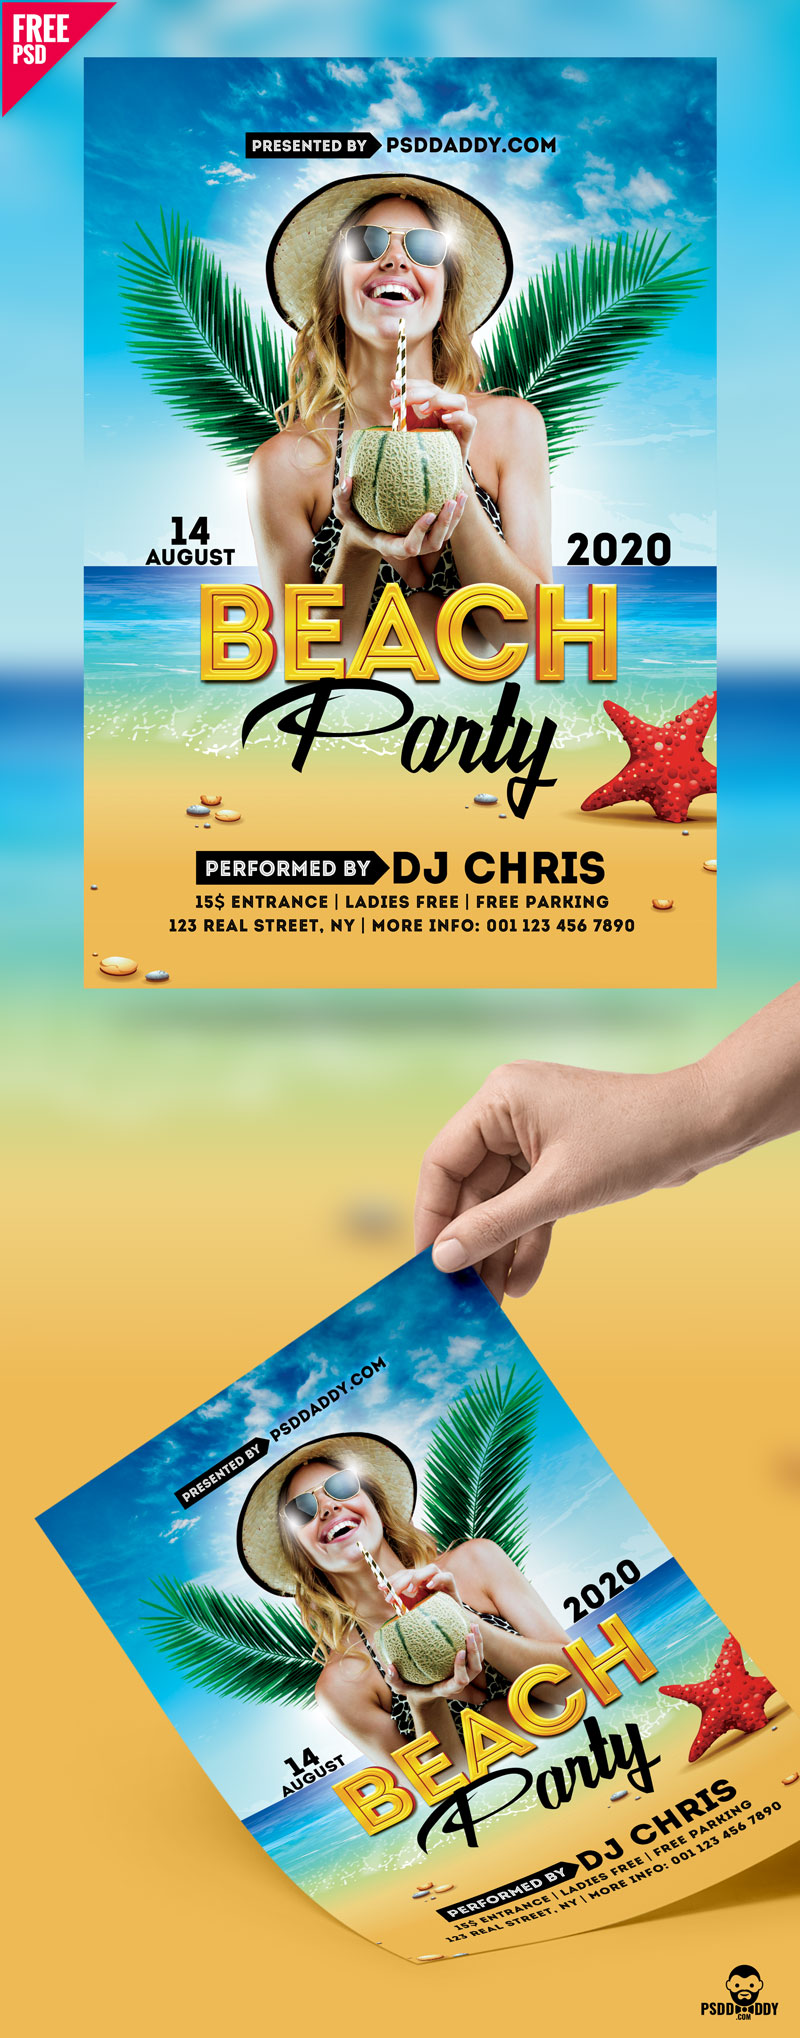 [Download] Beach Party Flyer Free PSD